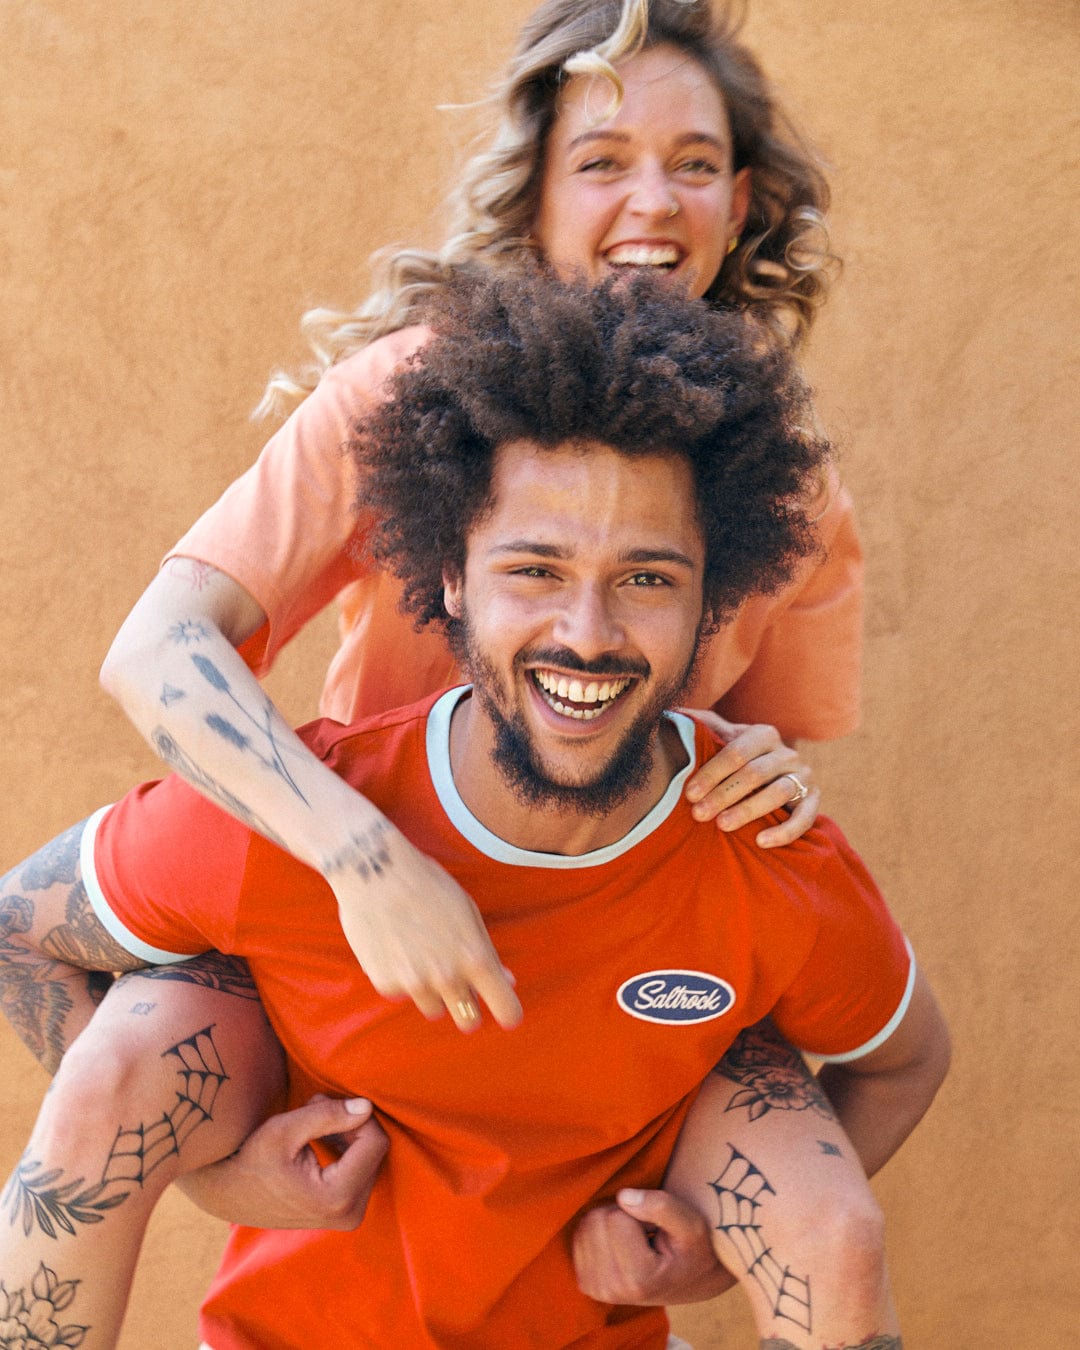 A joyful woman piggybacking on a cheerful man, both with tattoos and wearing red Striker Ringer - Mens Short Sleeve T-Shirts with Saltrock embroidered branding, smiling against a tan background.